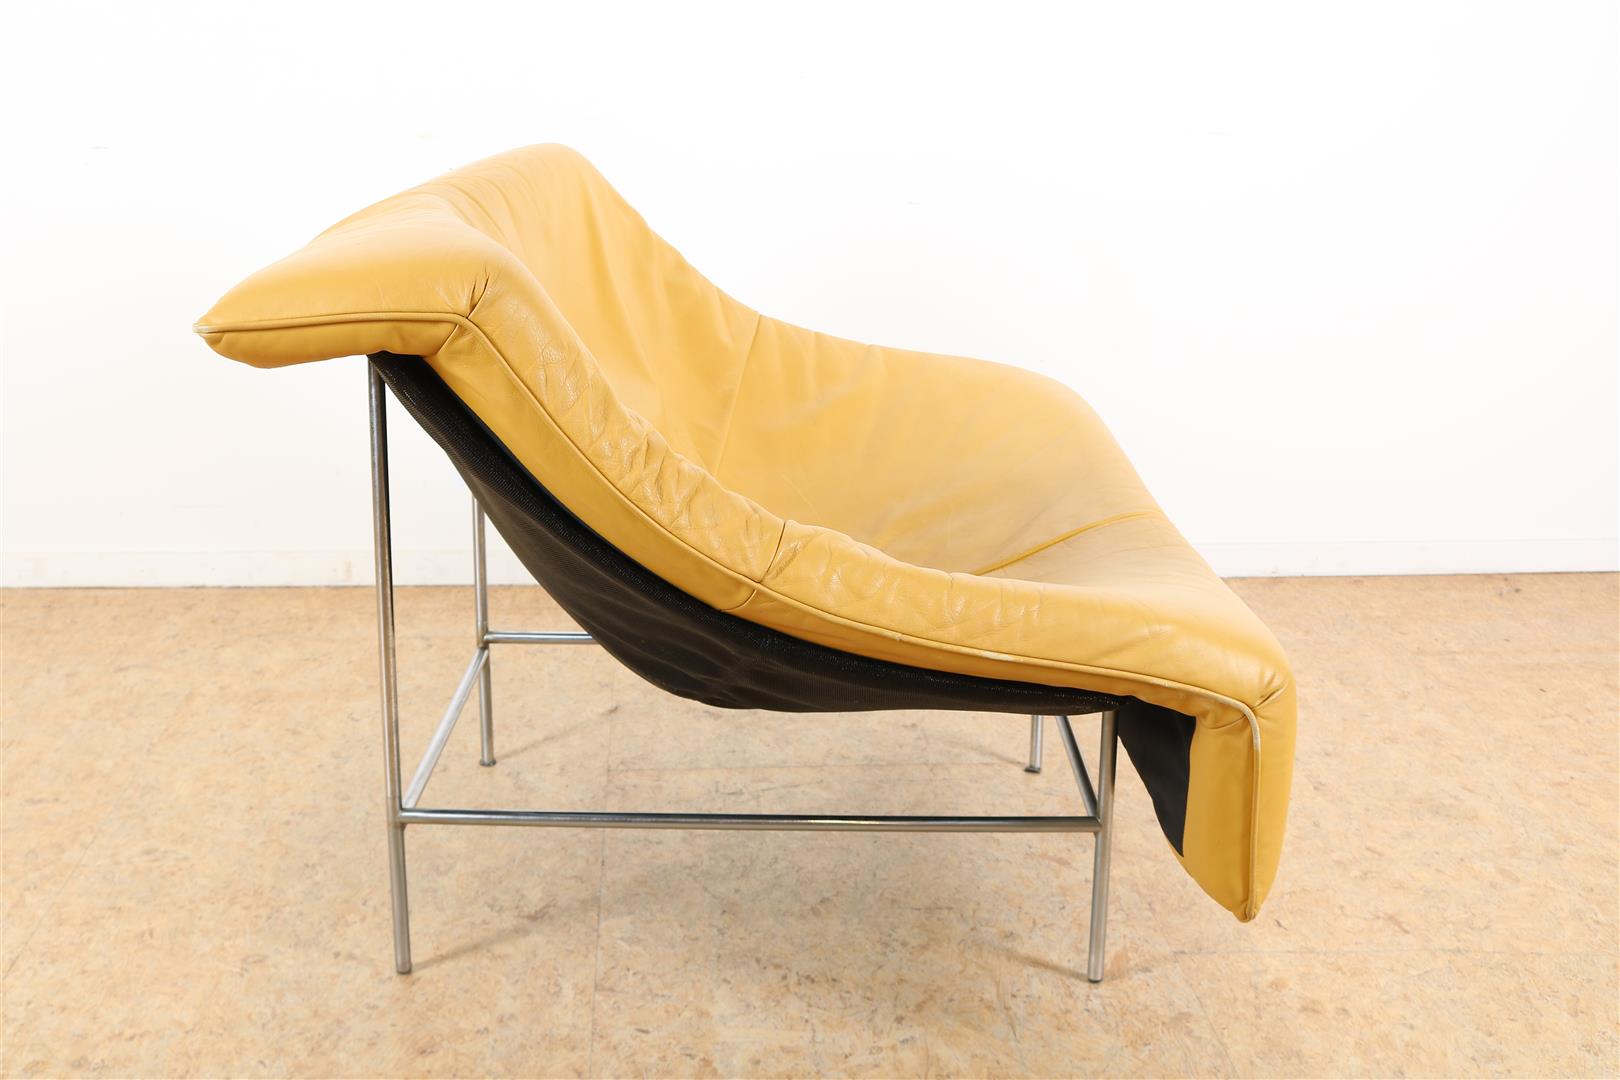 Chrome-plated design chair with yellow leather cushion, designer Gerard van den Berg for Montis, - Image 2 of 5